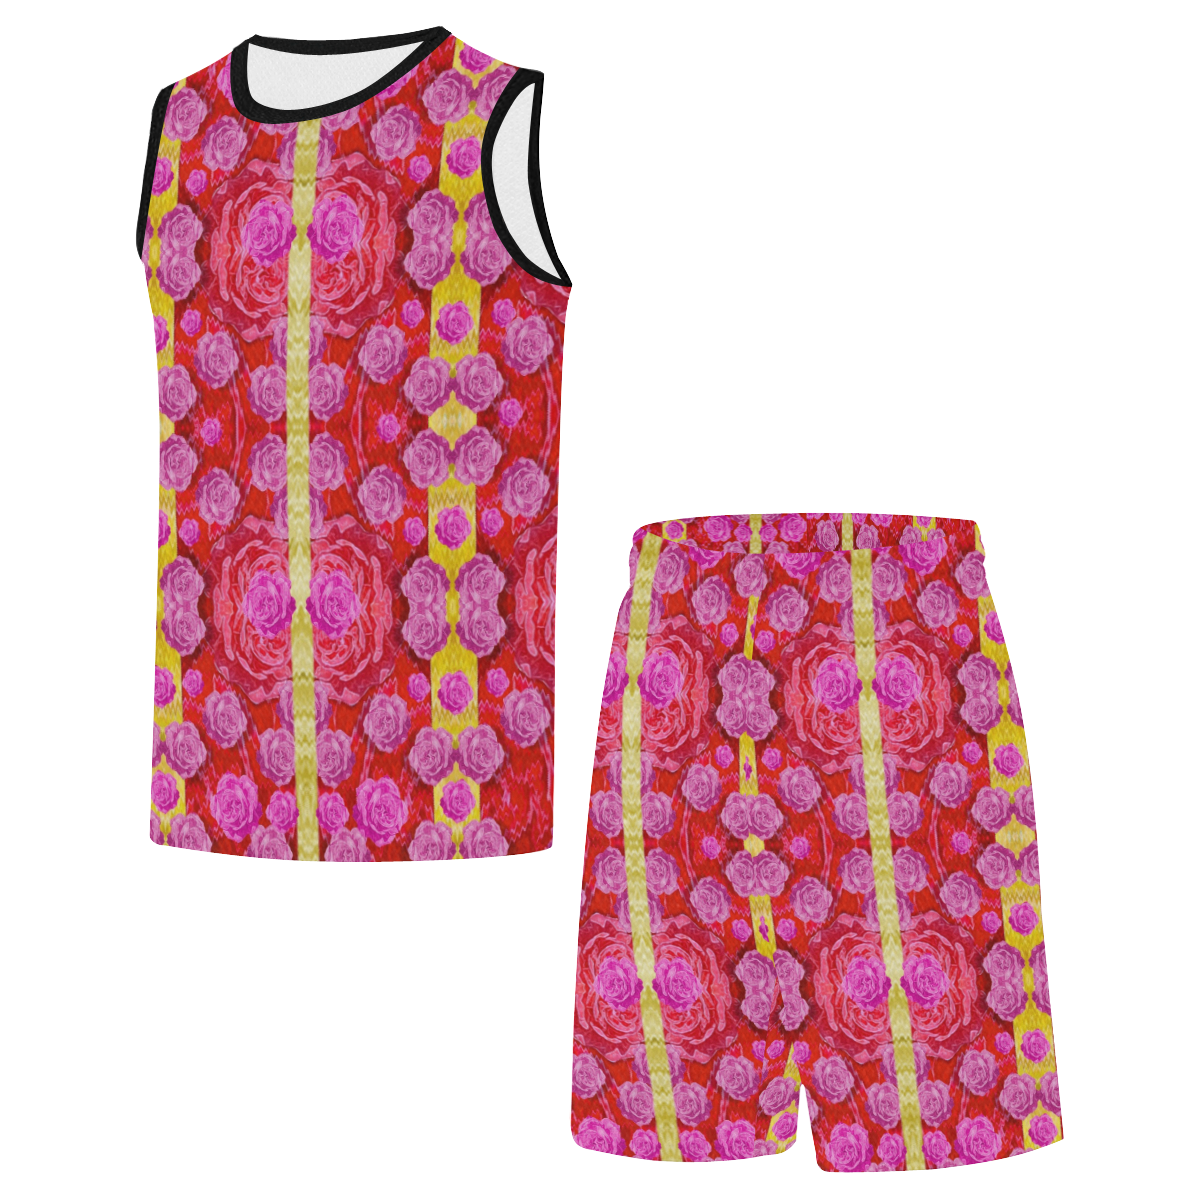 Roses and butterflies on ribbons as a gift of love All Over Print Basketball Uniform